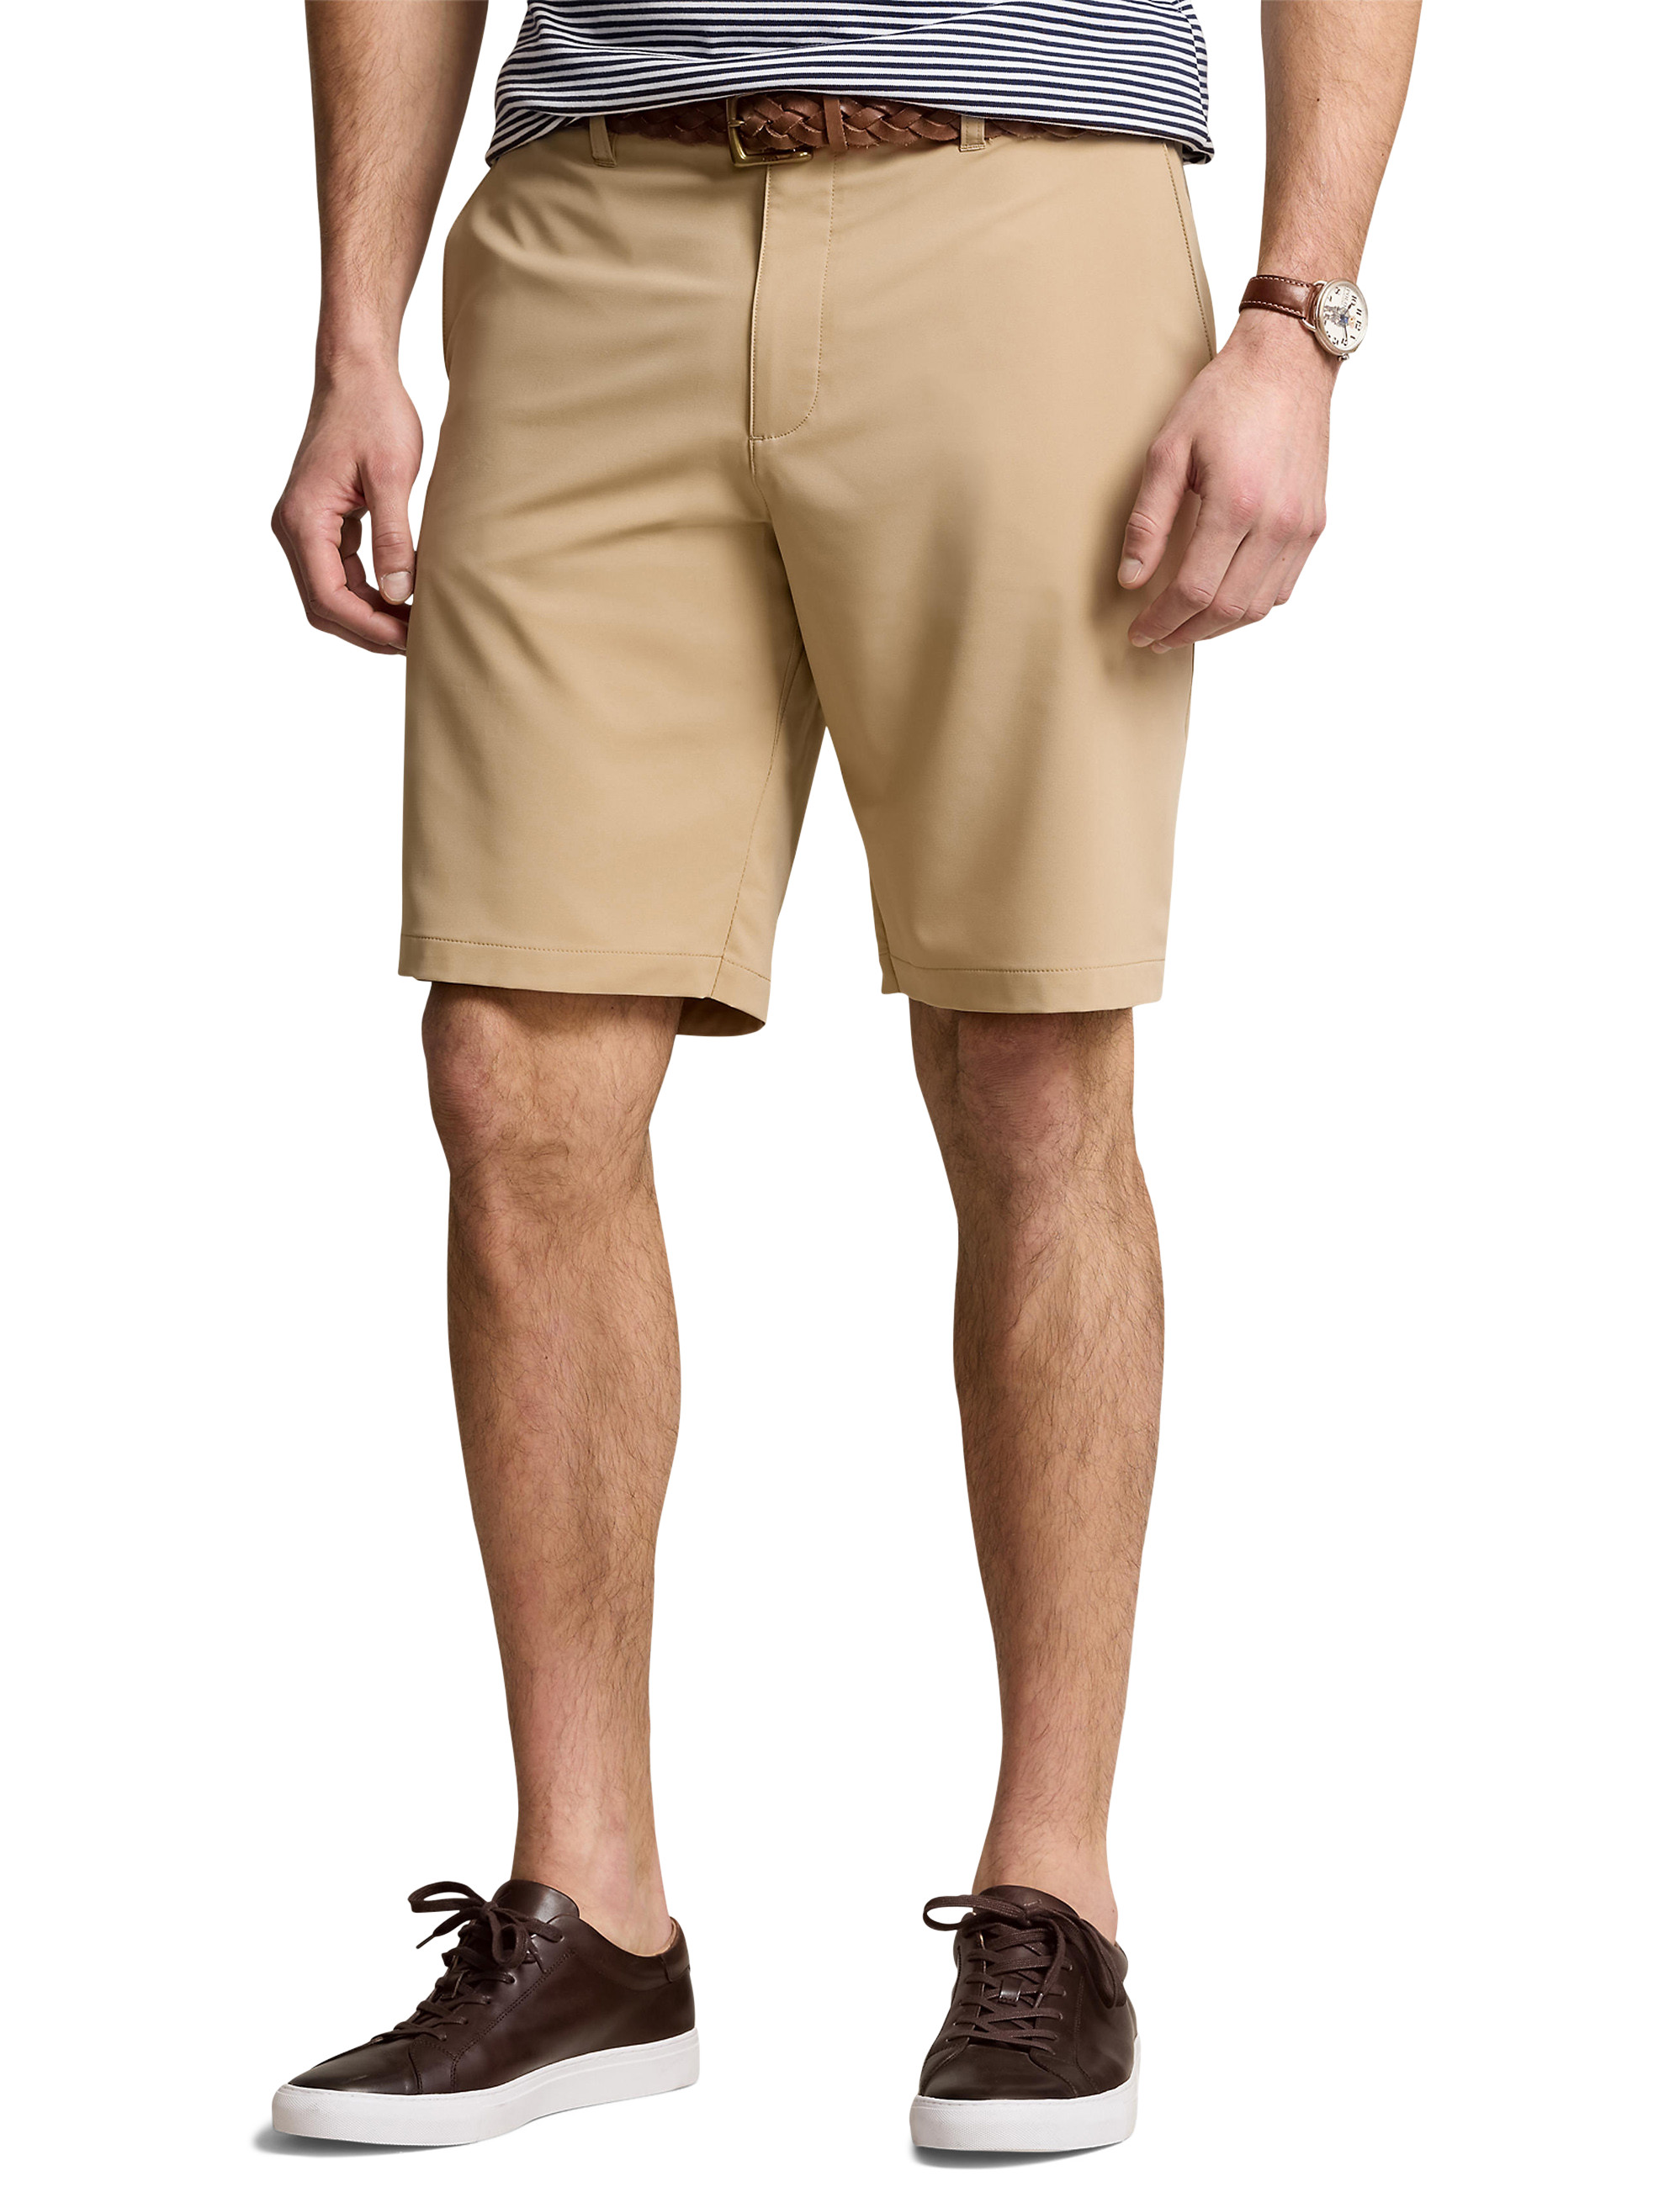 True Nation by DXL Men's Big and Tall Cargo Shorts Khaki 38